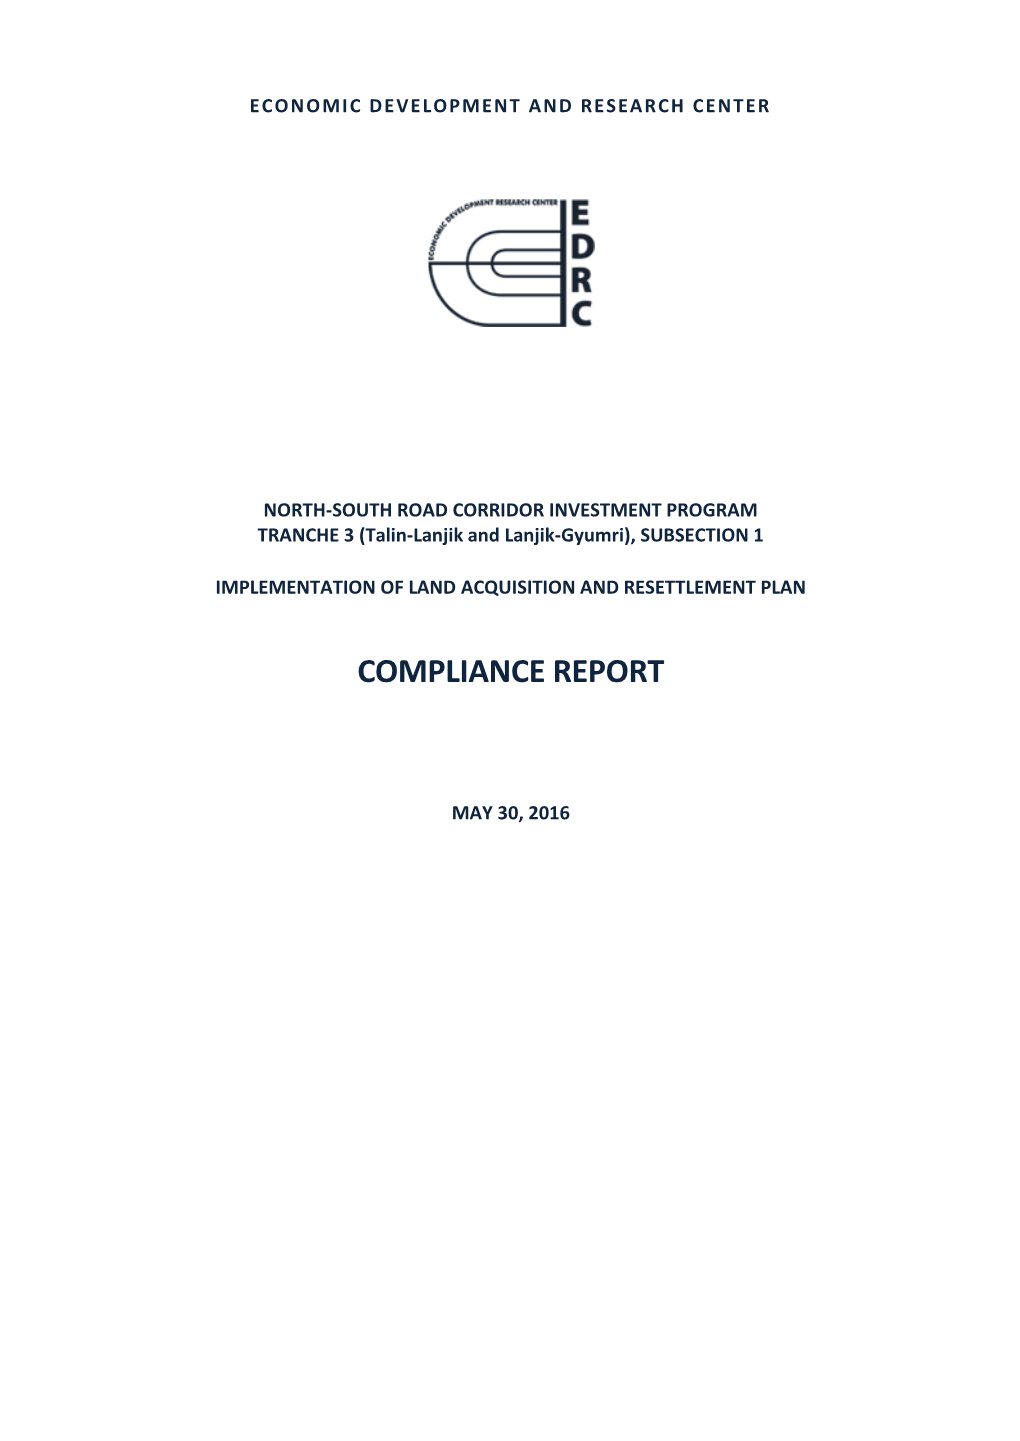 Compliance Report – Tranche 3, Subsection 1